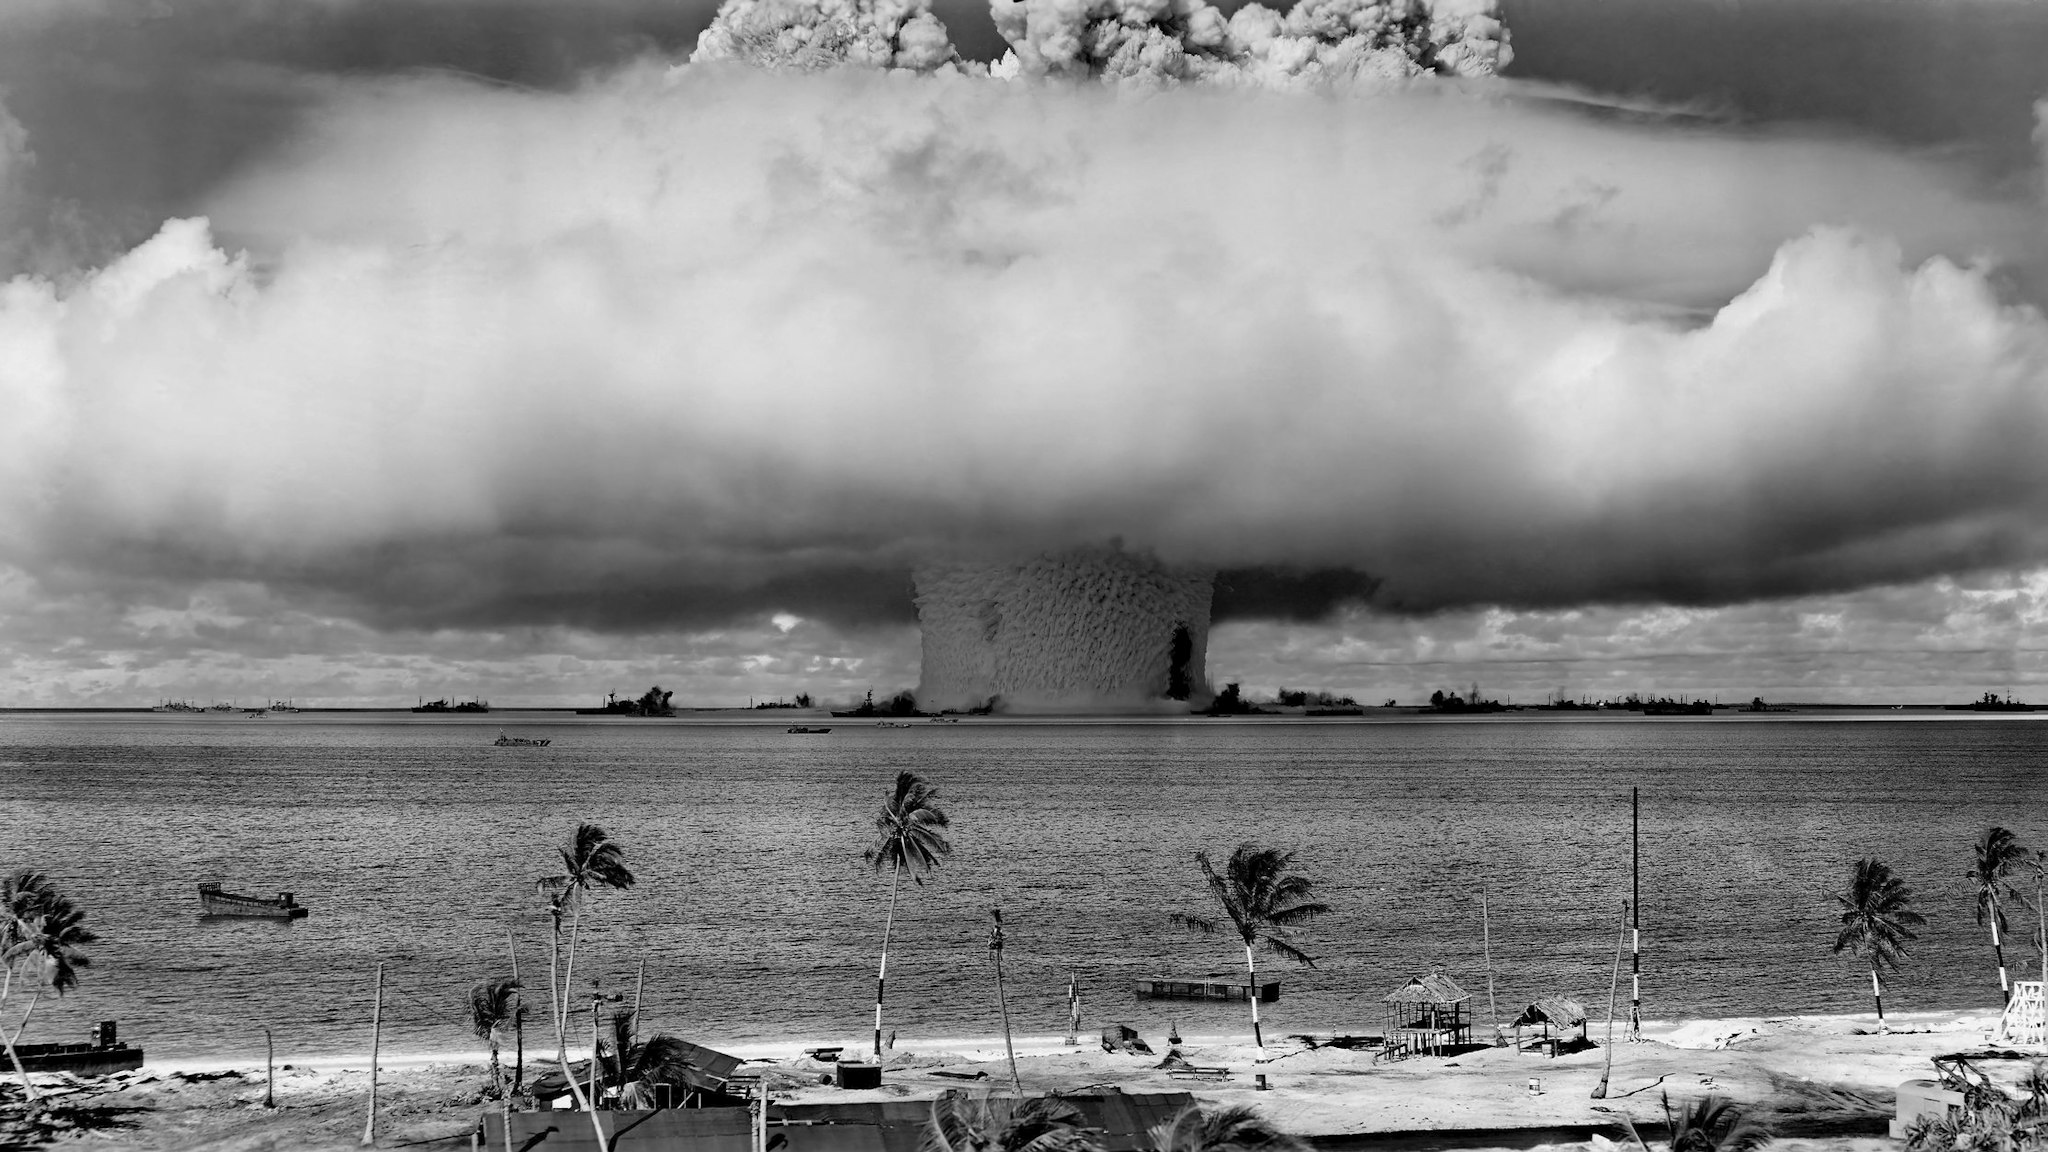 A nuclear weapon test by the American military at Bikini Atoll, Micronesia.